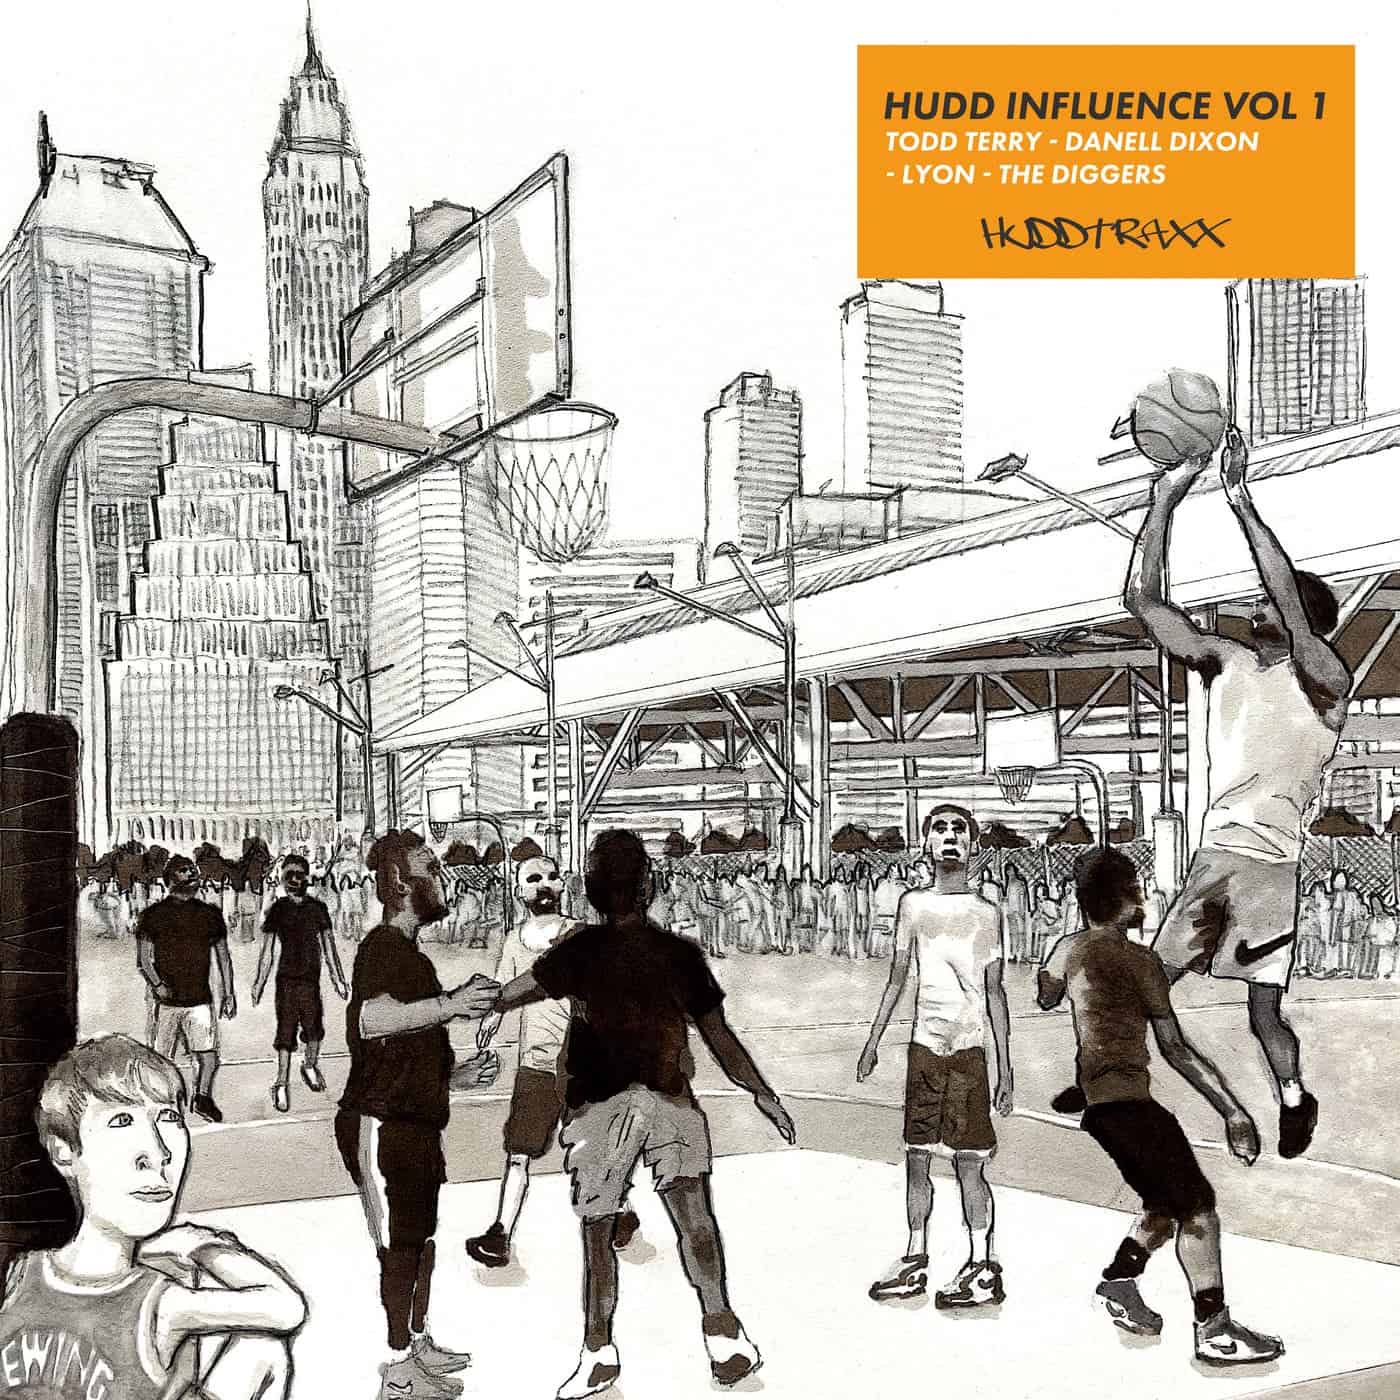 Download Todd Terry, Lyon, Danell Dixon, The Diggers - Hudd Influence Vol 1 on Electrobuzz